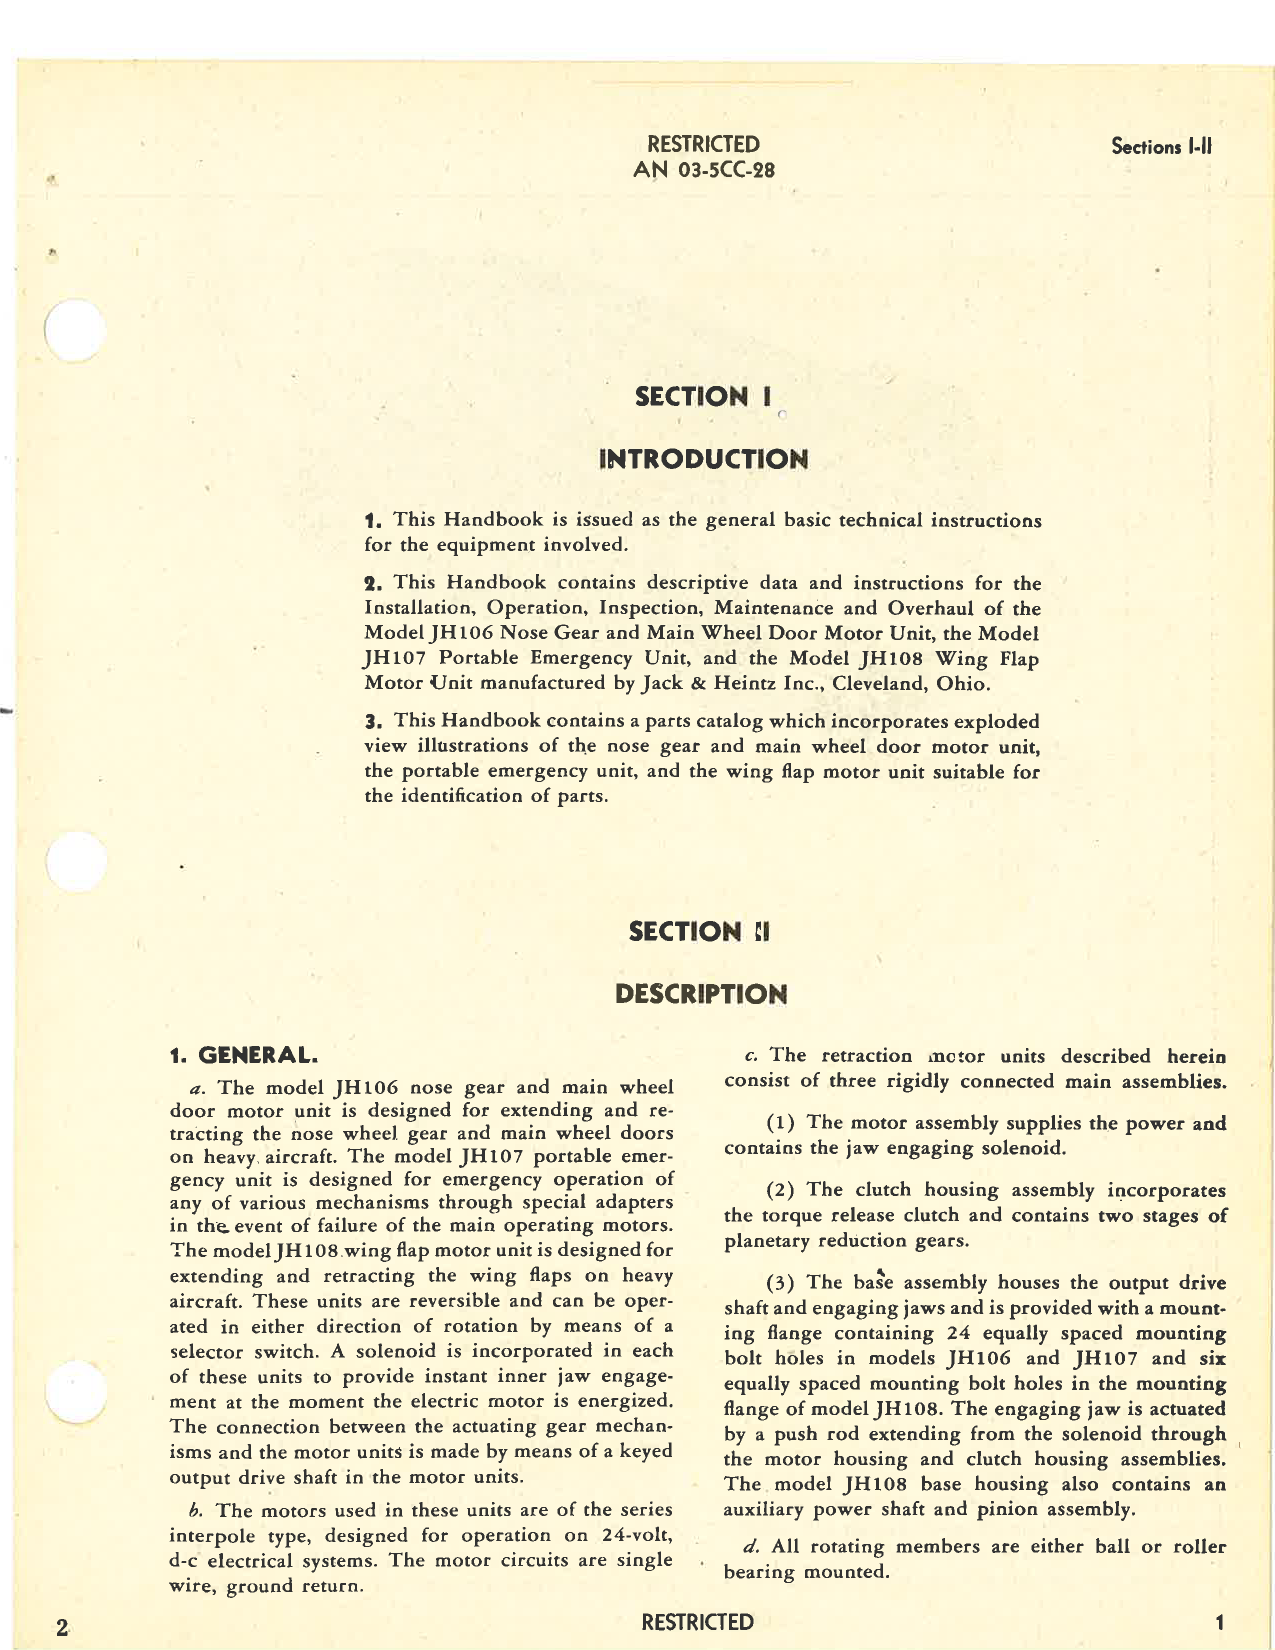 Sample page 5 from AirCorps Library document: Handbook of Instructions with Parts Catalog for Retracting Motors Models JH106, JH107, and JH108